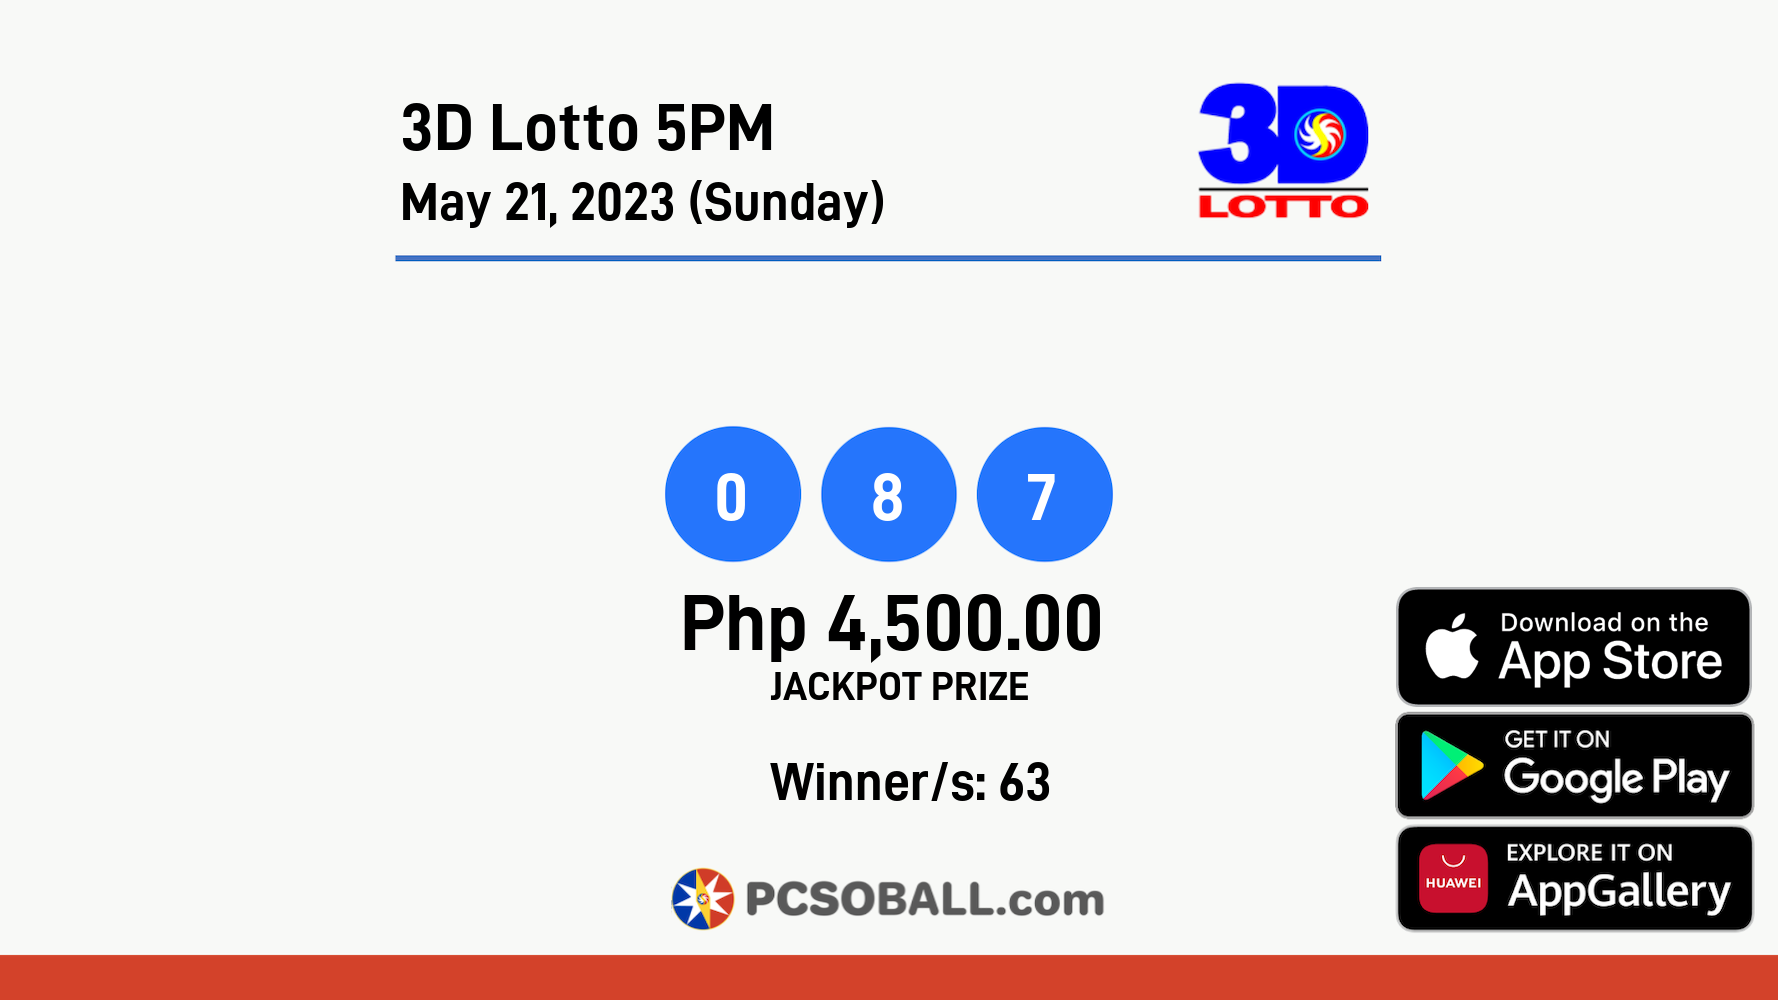 3D Lotto 5PM May 21, 2023 (Sunday) Result